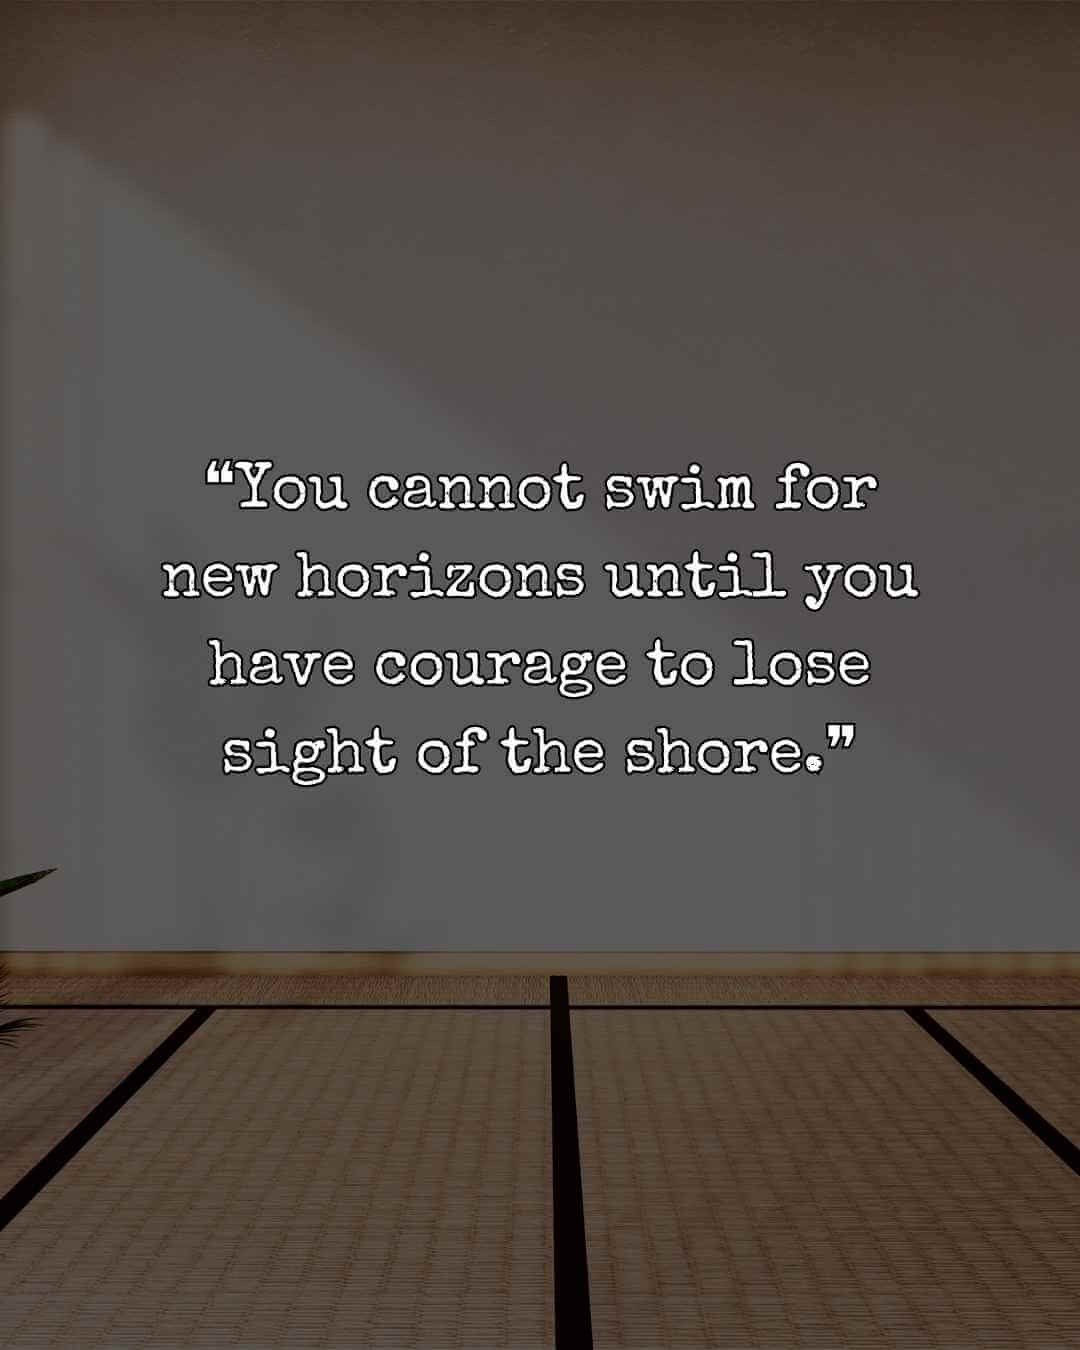 ❝You cannot swim for new horizons until you have courage to lose sight of the shore.❞